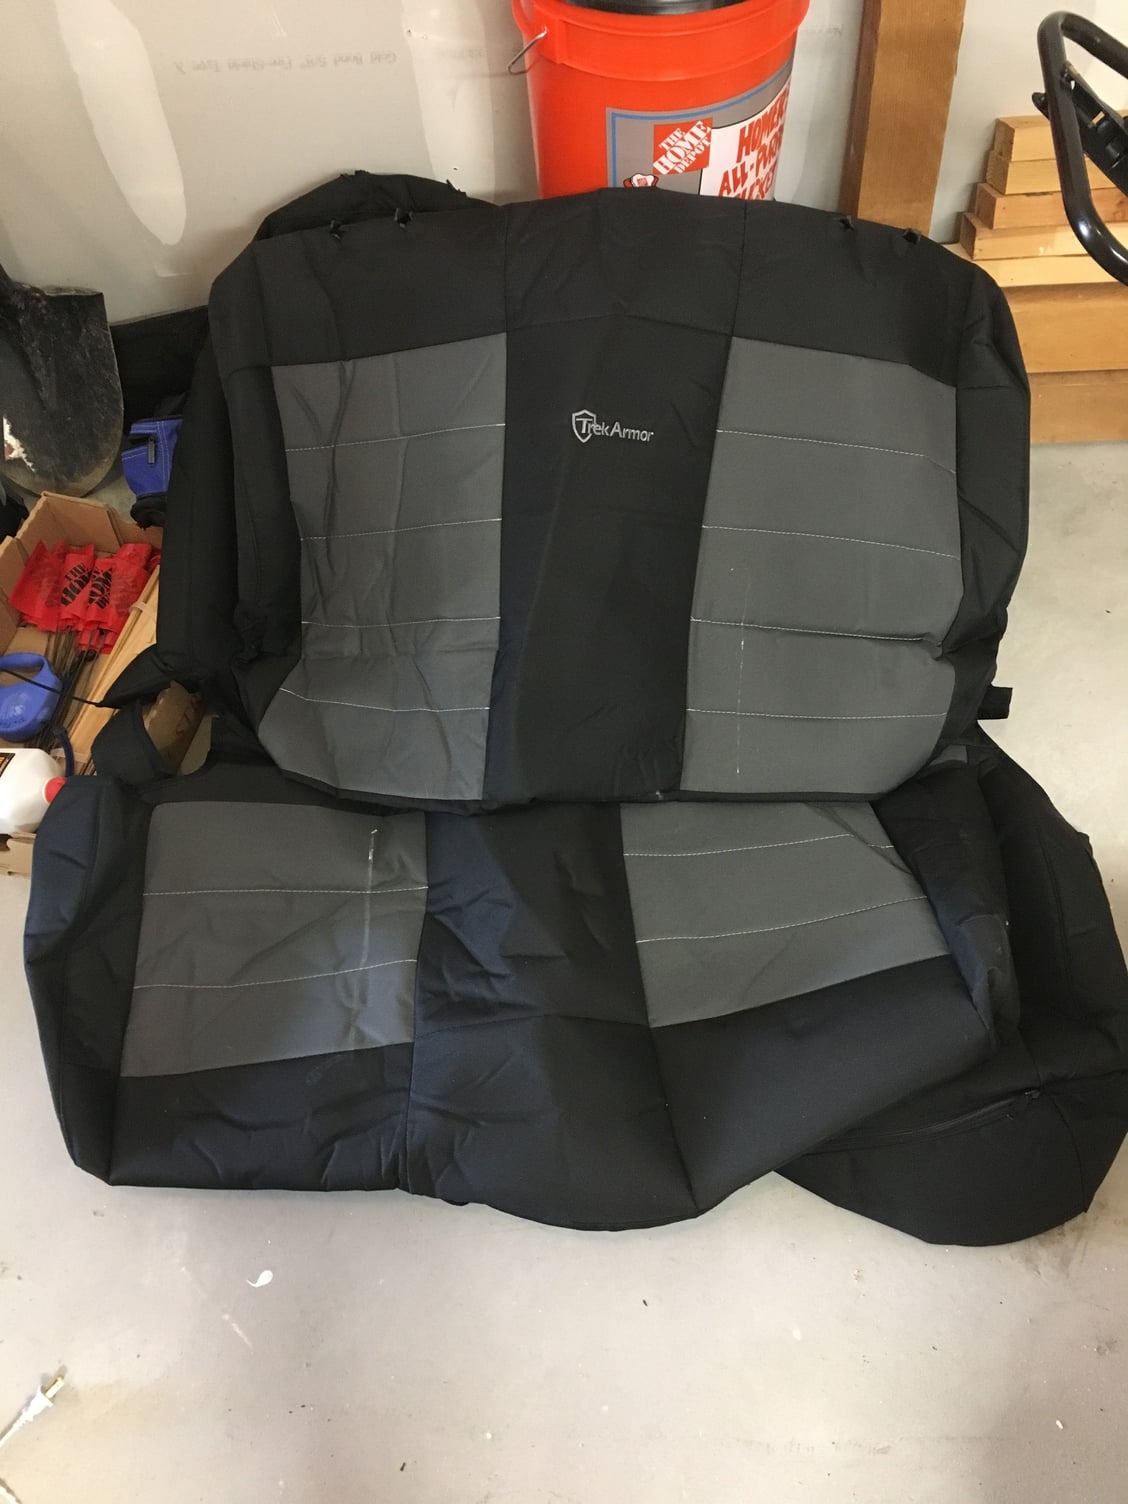 Interior/Upholstery - TrekArmor Seat Covers - Used - 2015 Jeep Wrangler - Castle Rock, CO 80108, United States